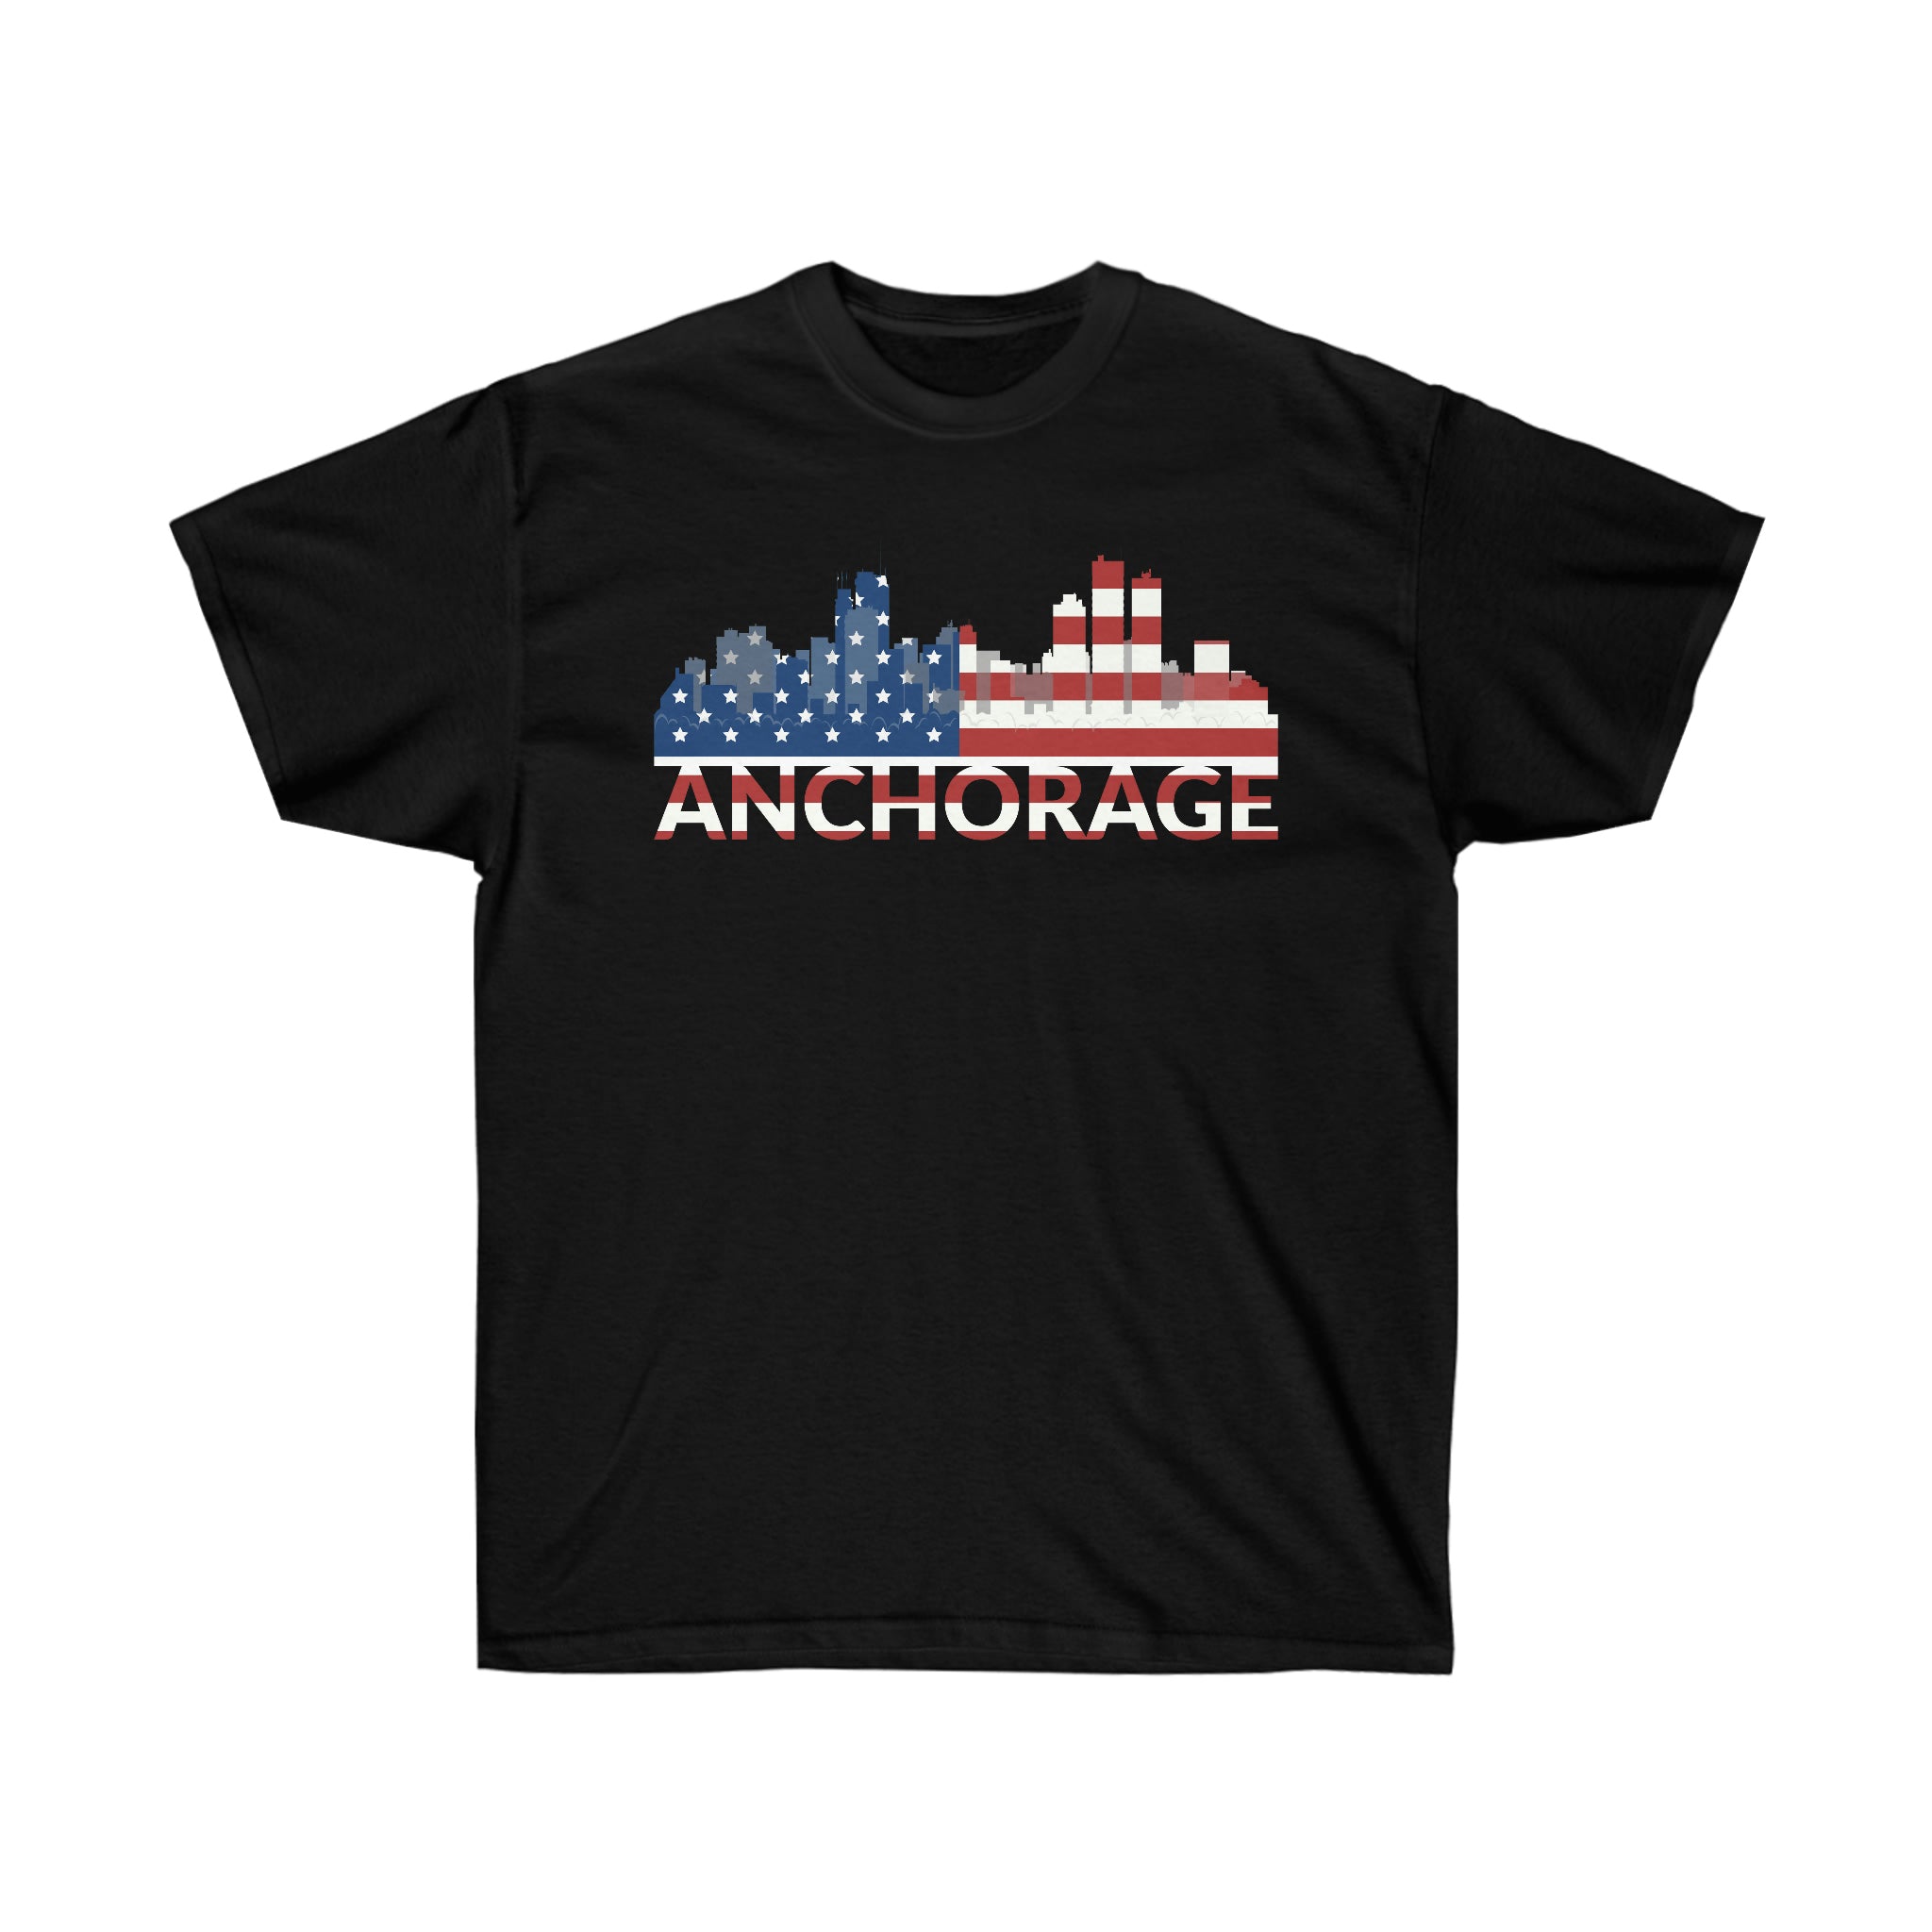 Unisex Ultra Cotton Tee "Higher Quality Materials"(ANCHORAGE)